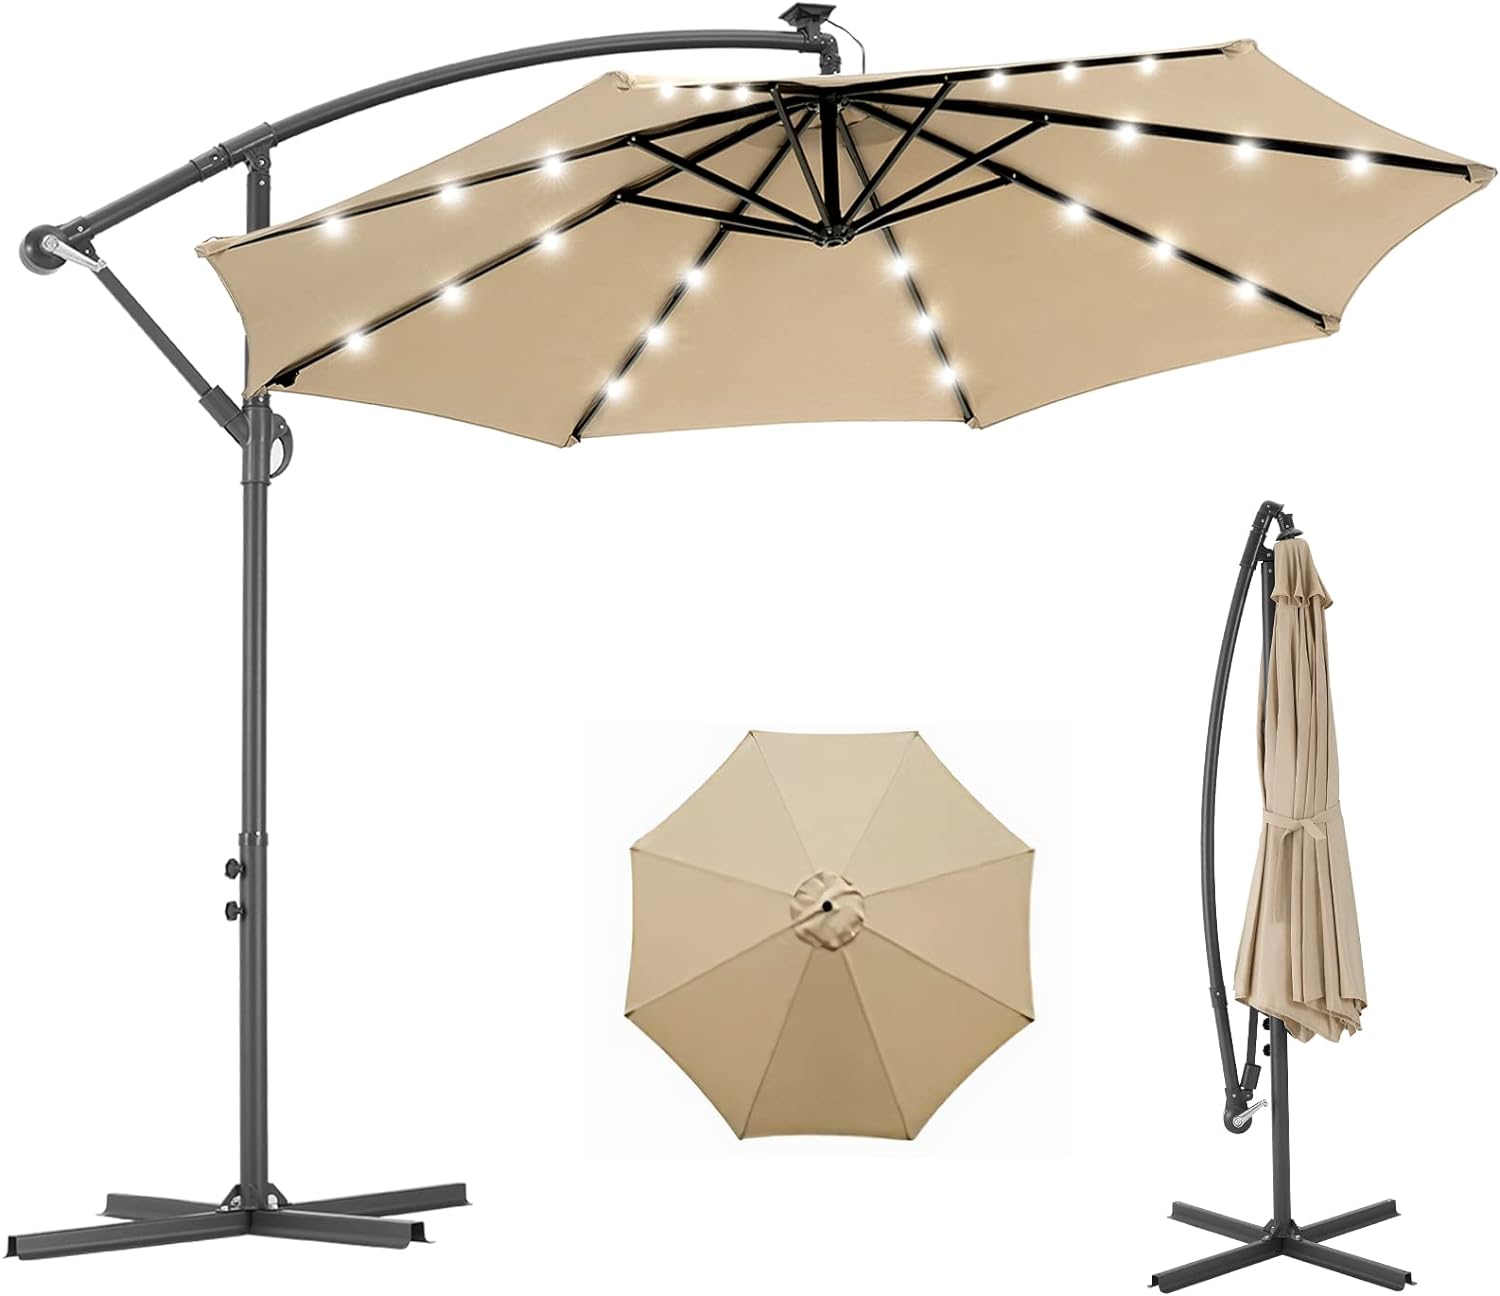 AECOJOY 10FT Patio Outdoor Umbrella with Solar Powered LED Hanging Offset Umbrella with Cross Base, 24 LED Lights for Backyard, Beige